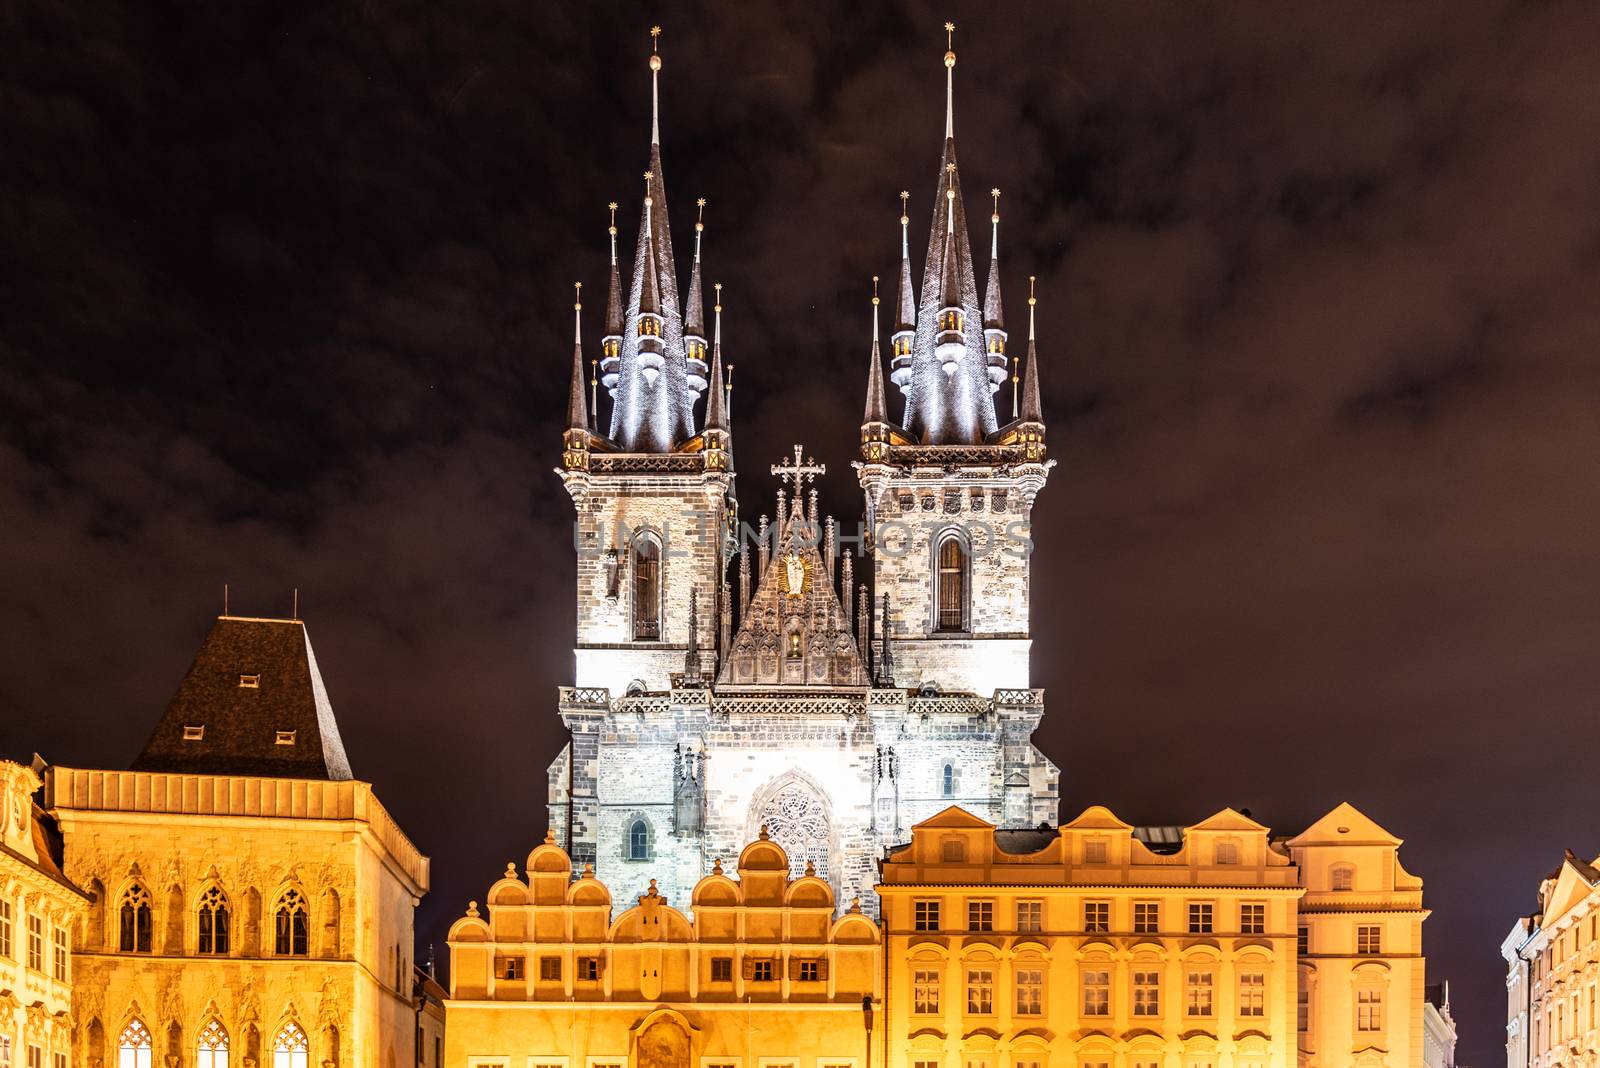 Two gothic towers of Church Of Our Lady Before Tyn at Old Town Square by night. Prague, Czech Republic.